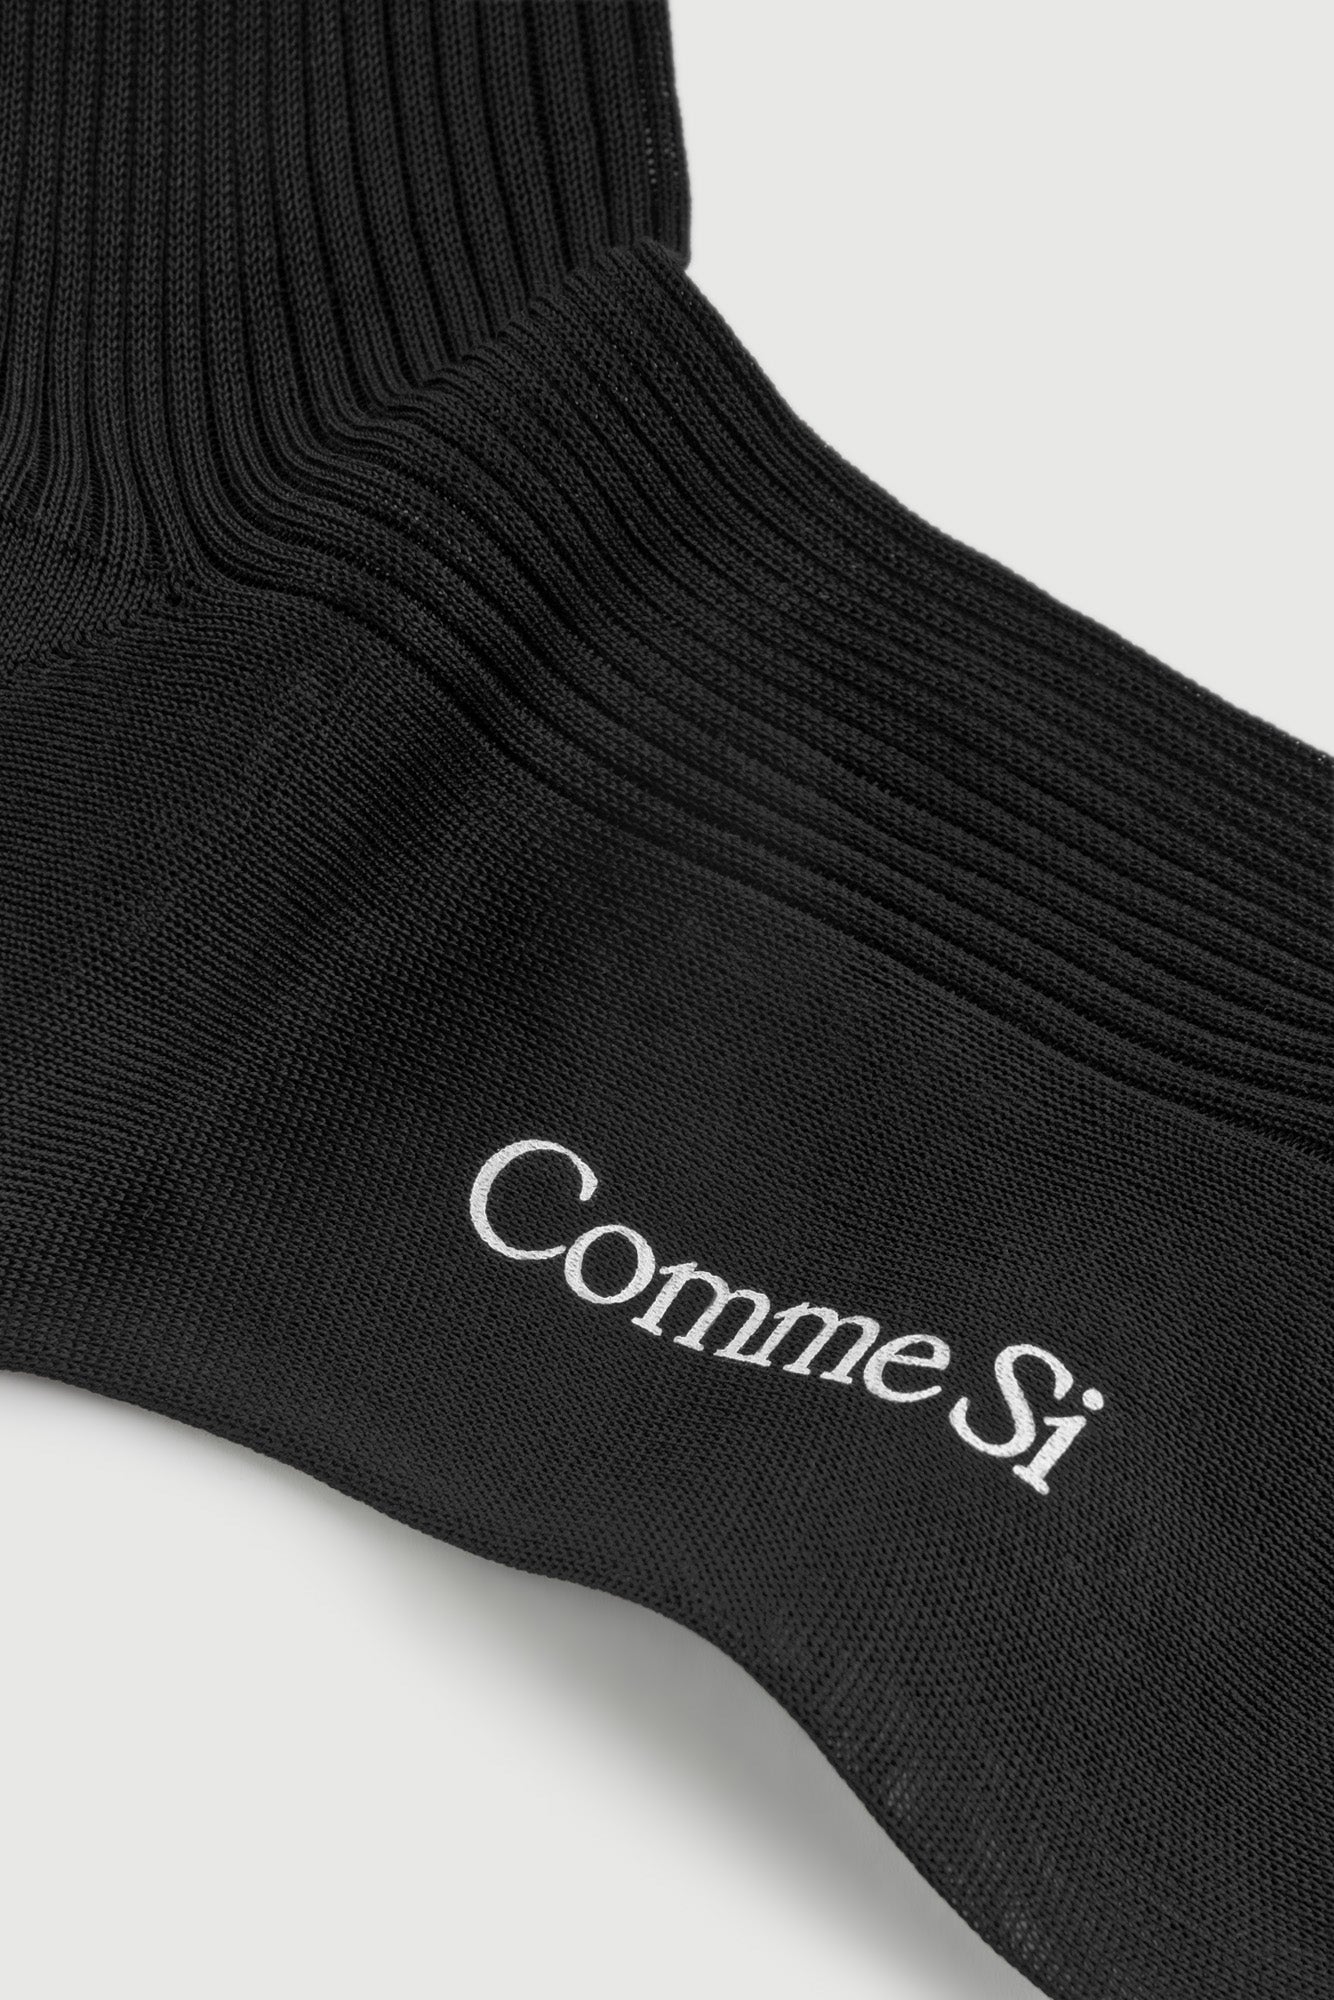 The Agnelli Sock – Comme Si